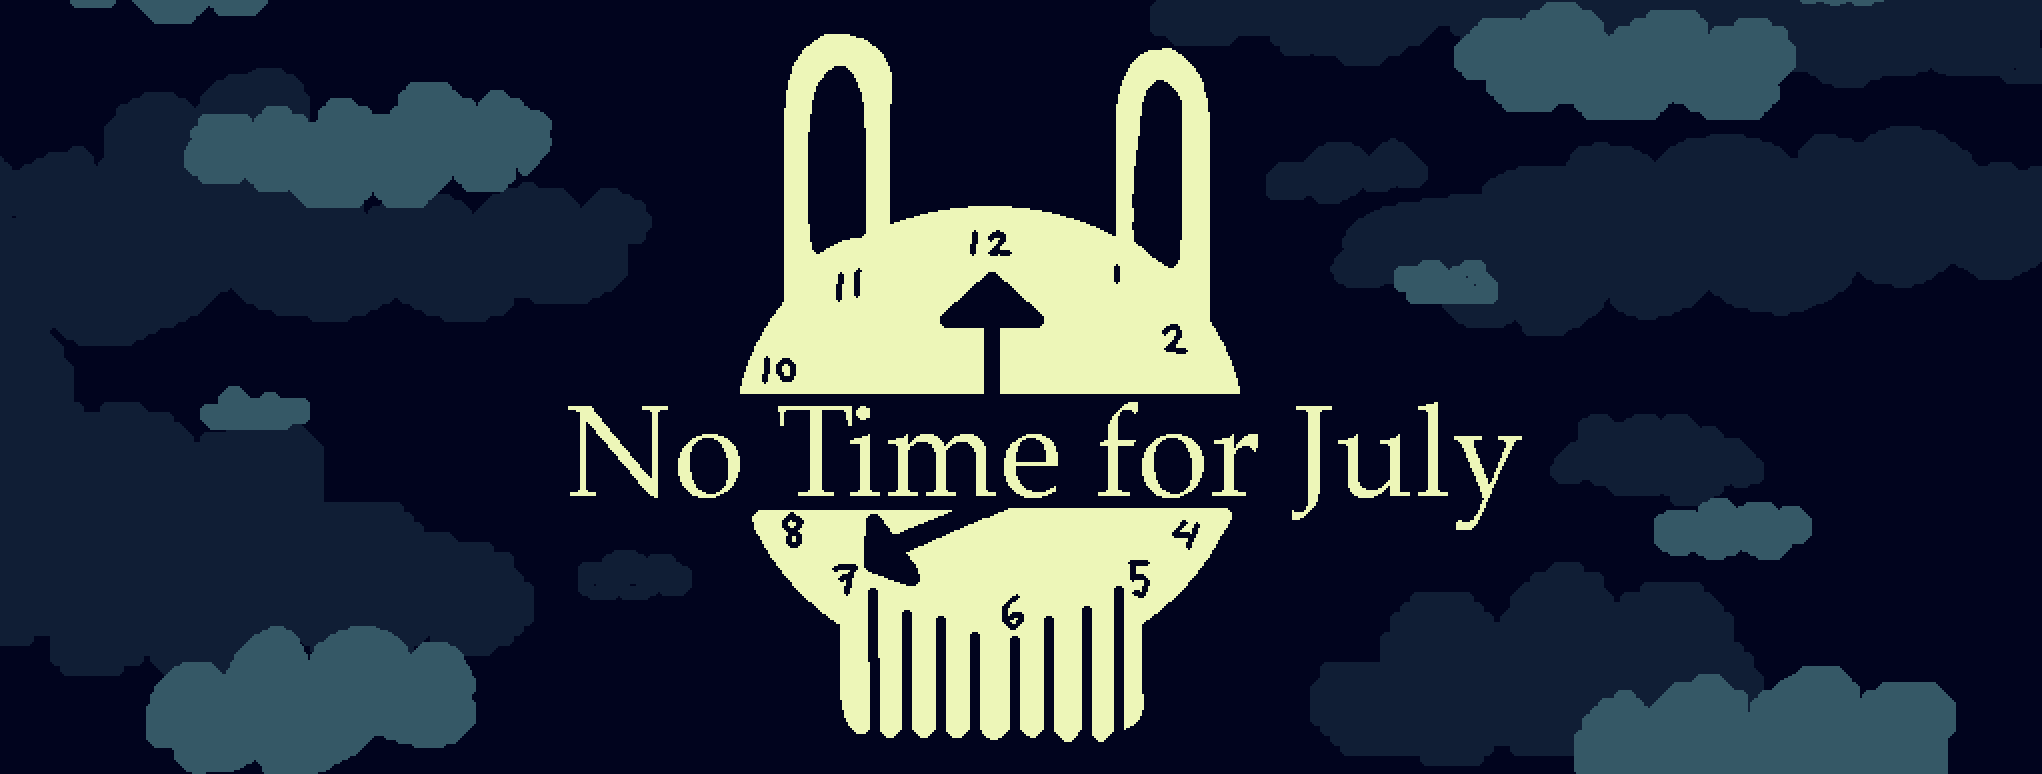 No Time For July